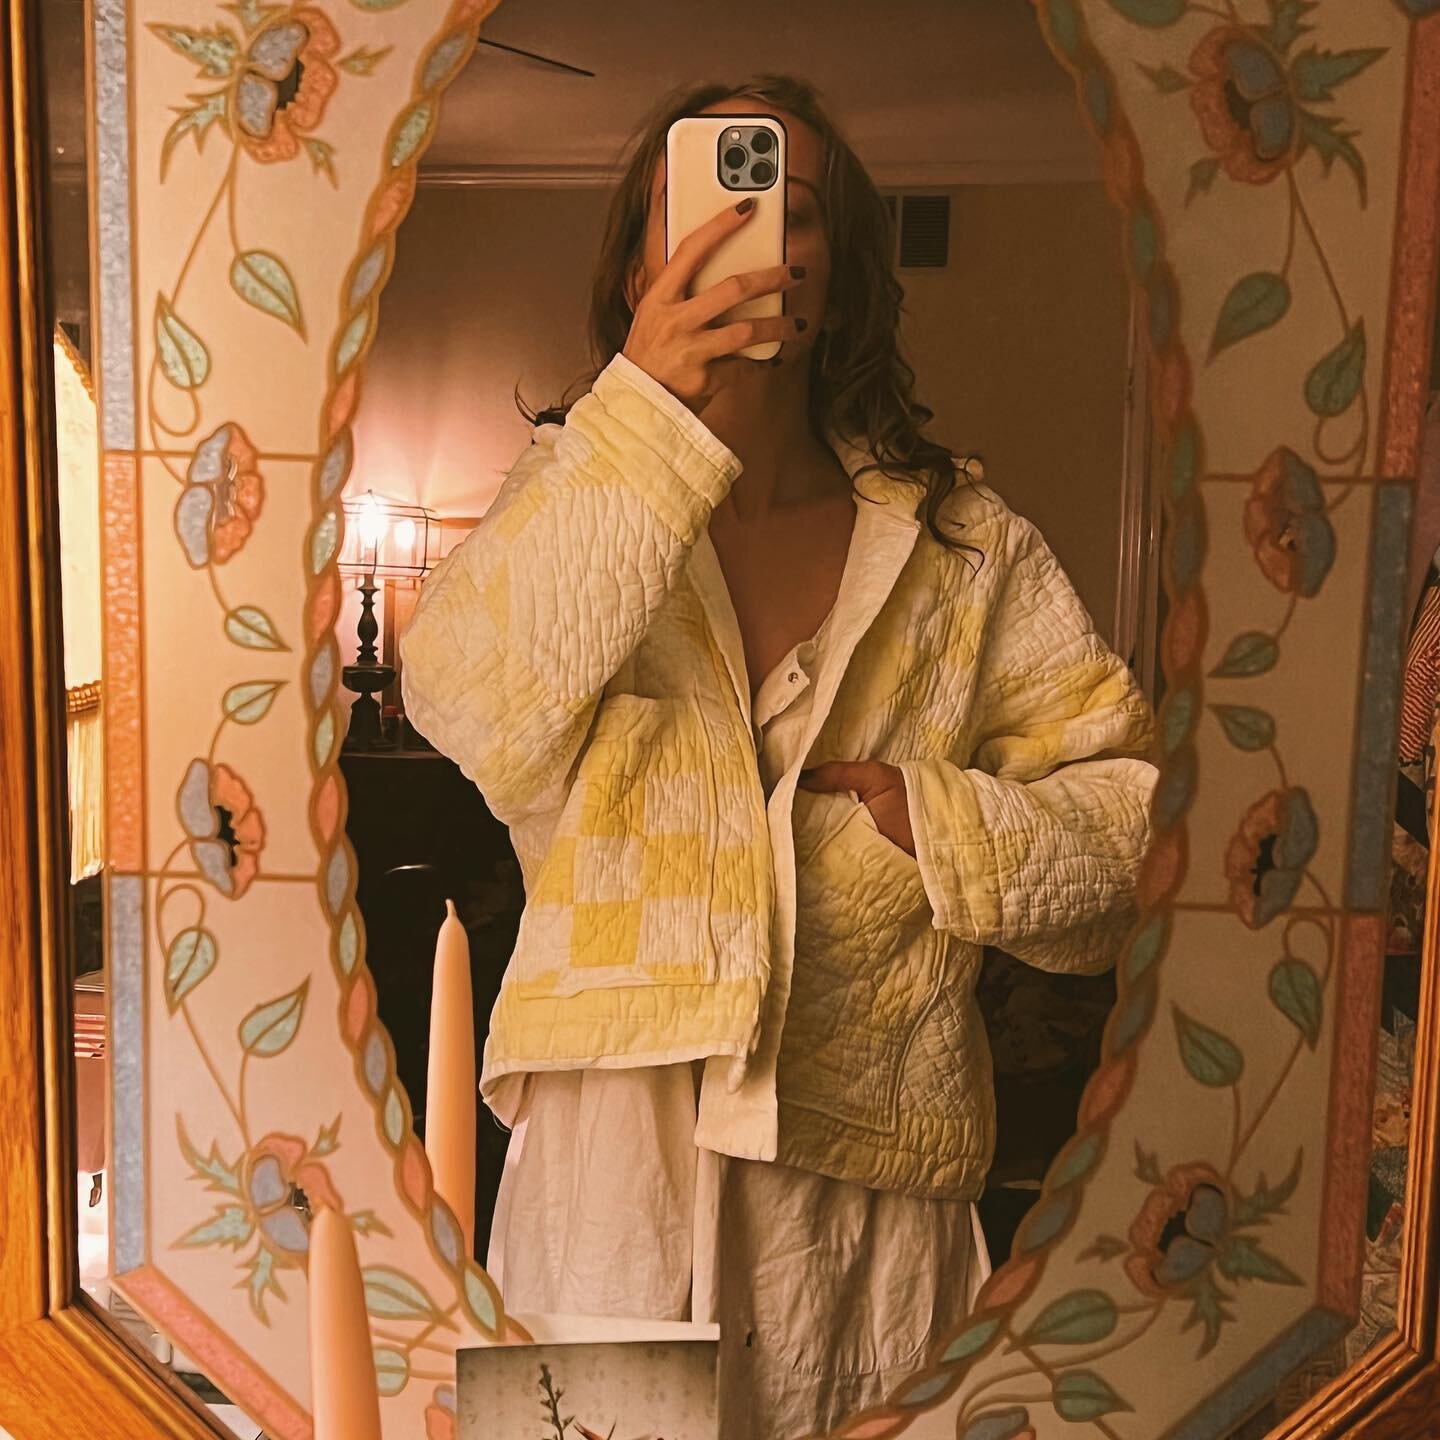 extra special buttery quilt coat for the one n&rsquo; only @malhowtay 30th 💛
-LL